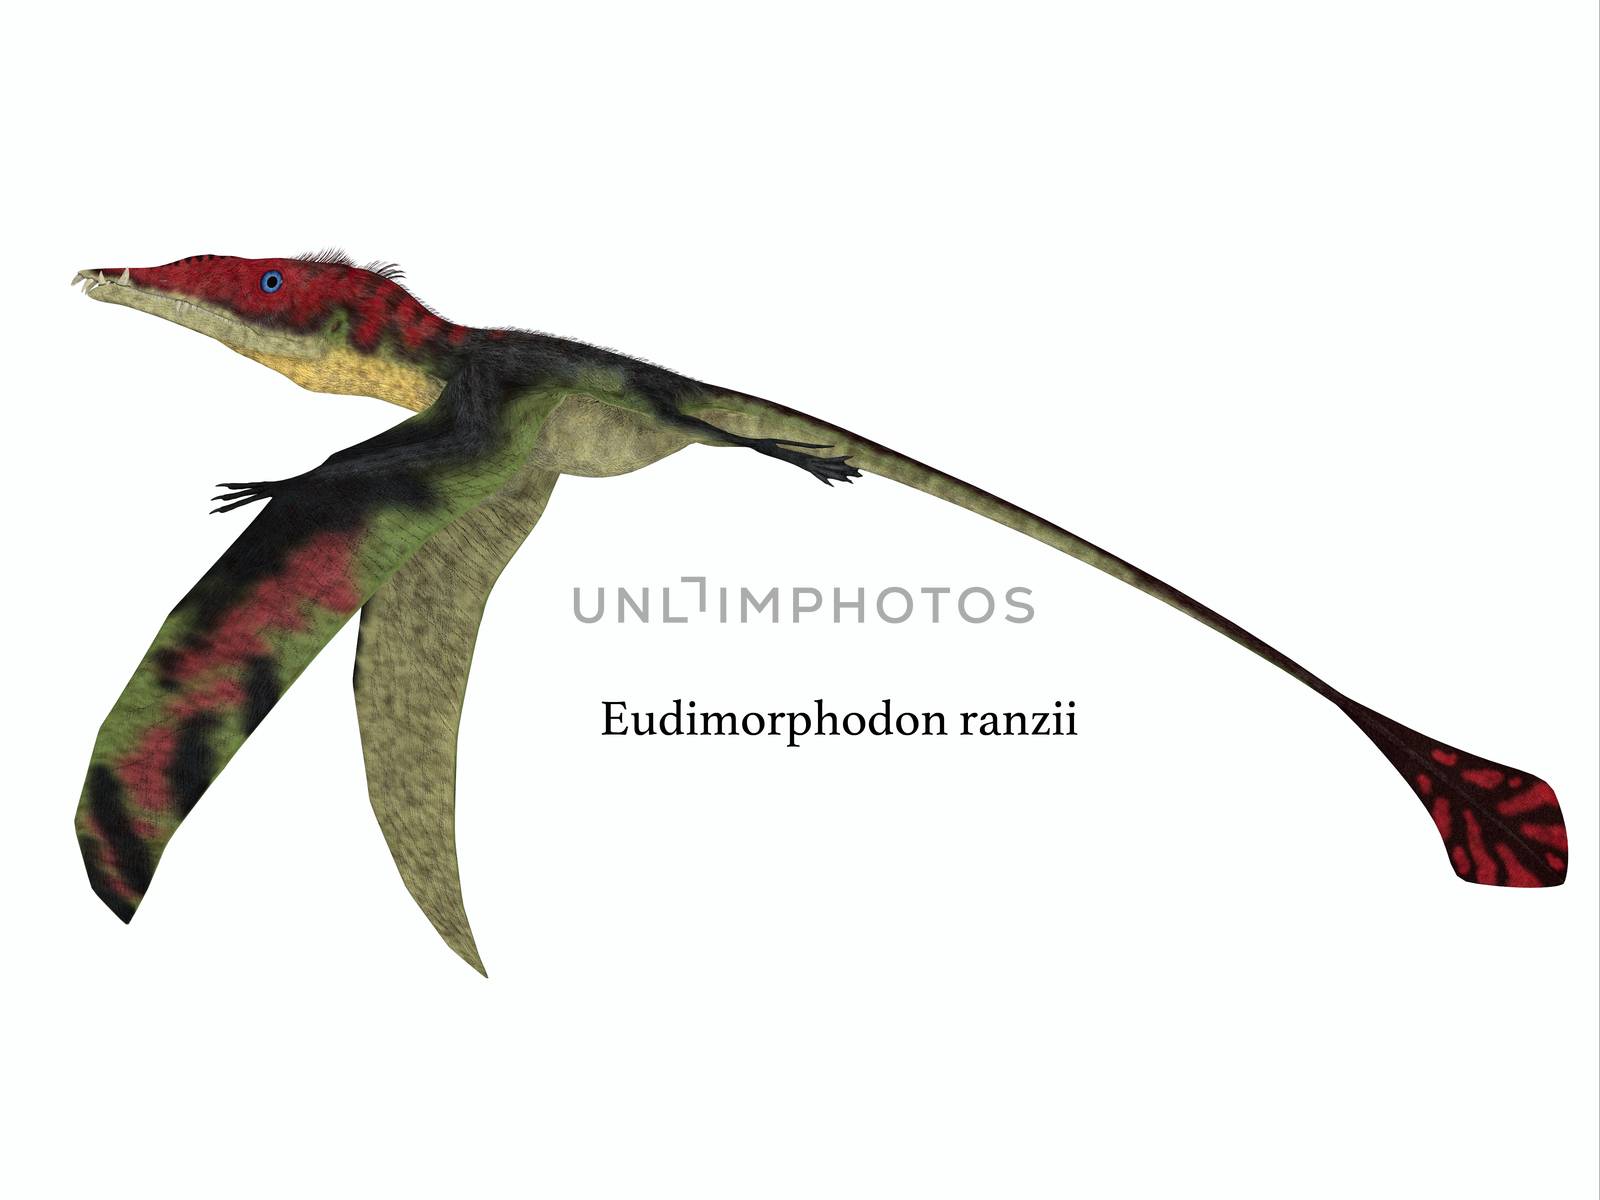 Eudimorphodon Wings Down with Font by Catmando